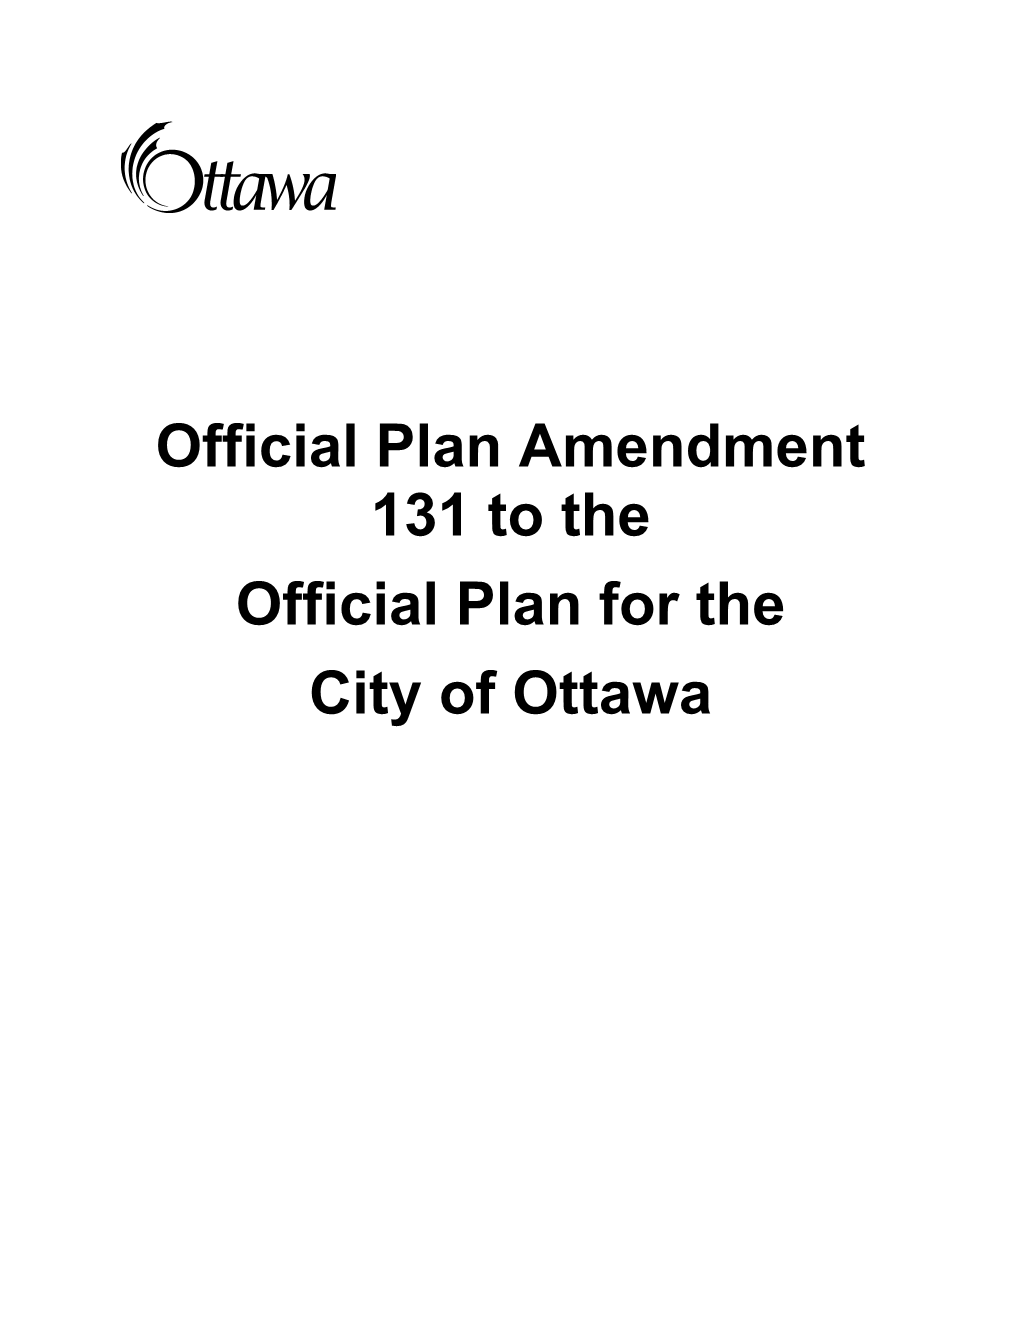 Official Plan Amendment 131 to the Official Plan for the City of Ottawa